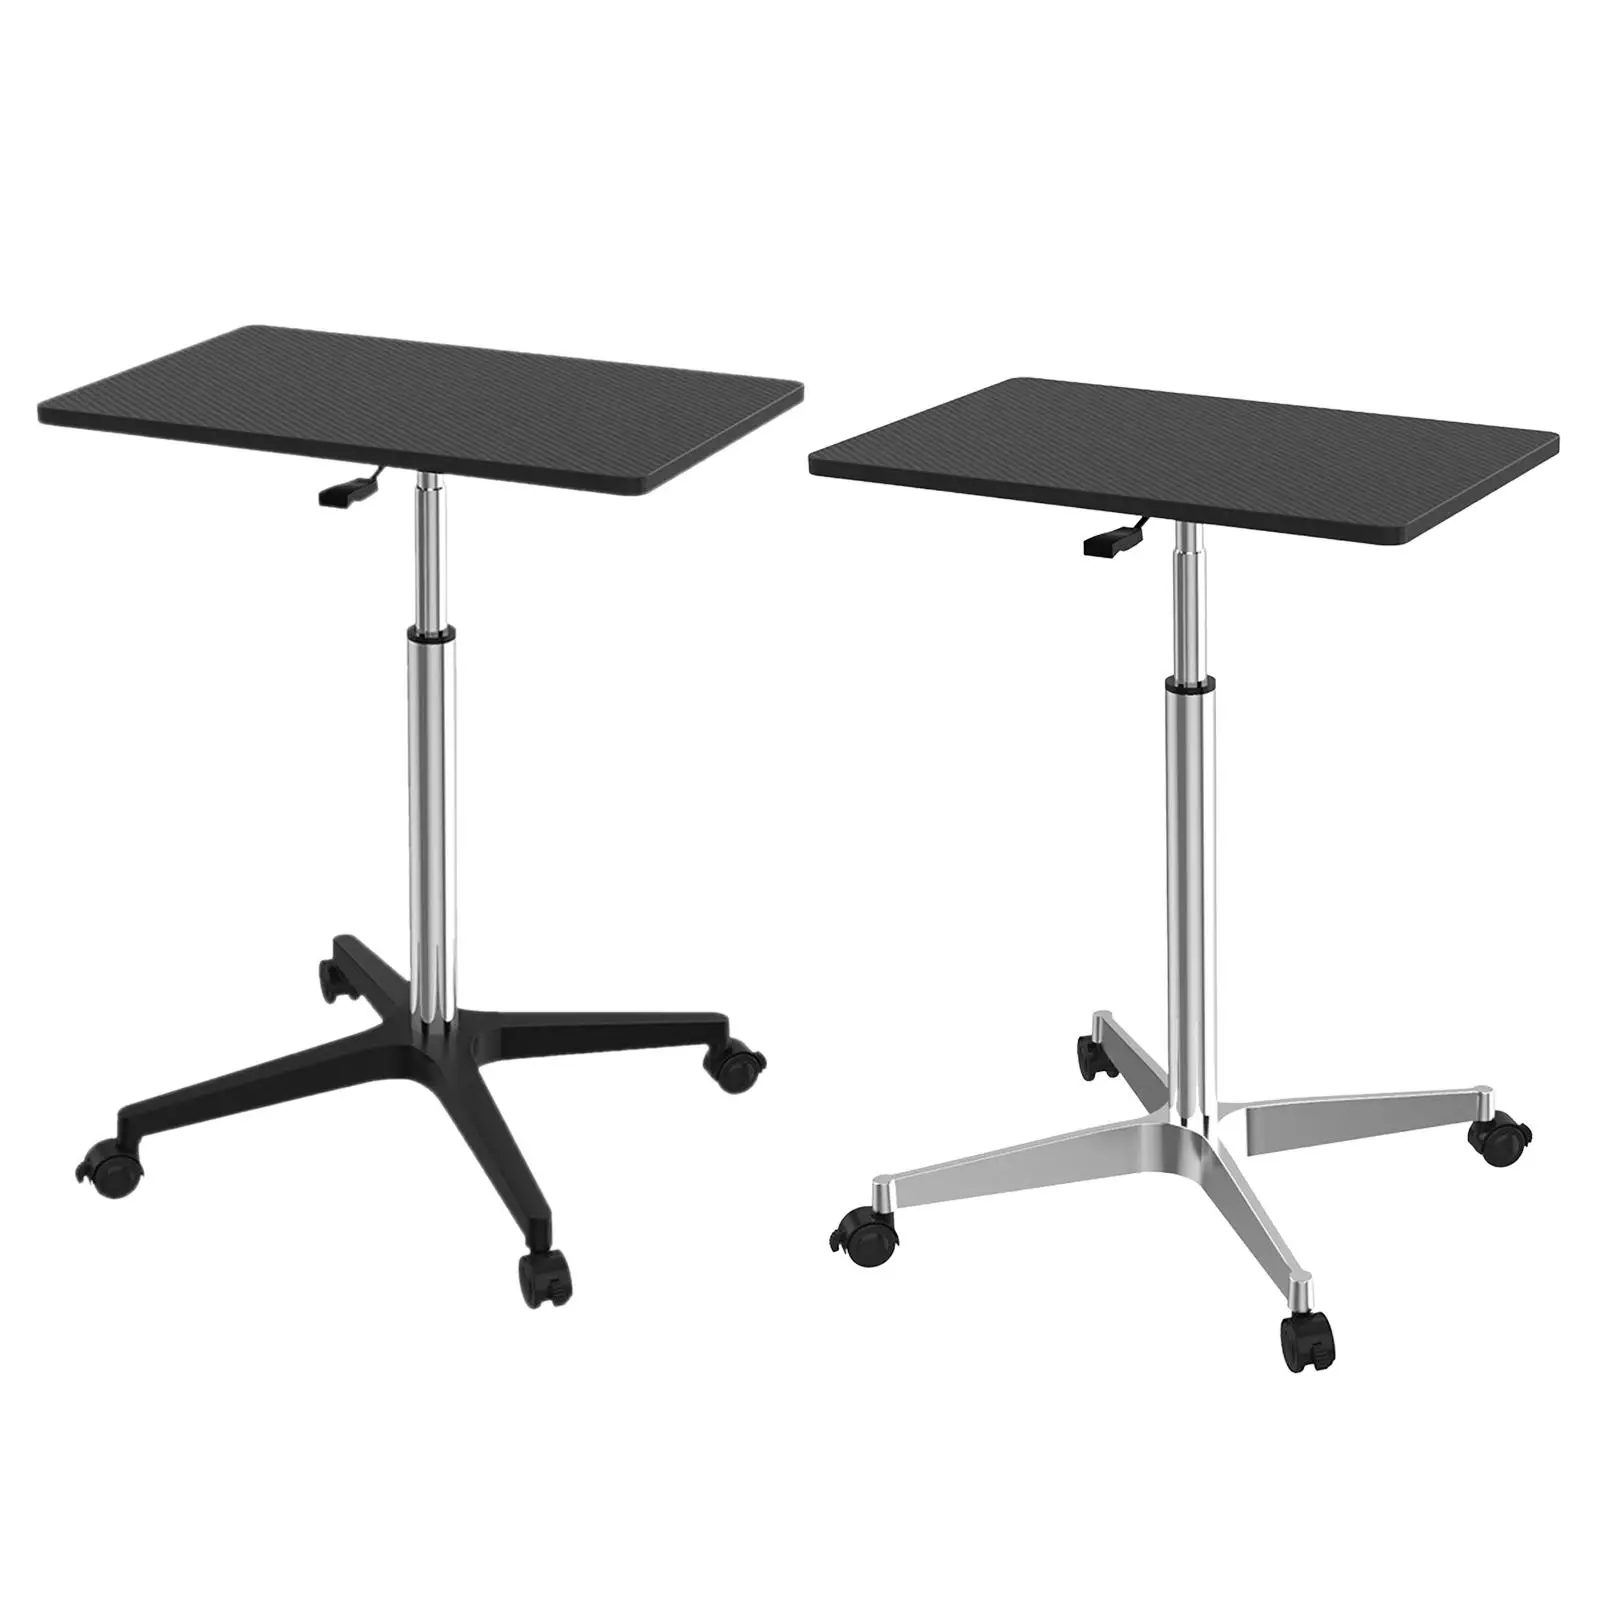 Height Adjustable Mobile Laptop Standing Desk Workstation for Offices Classrooms and Teachers Lightweight Work Table Black Color